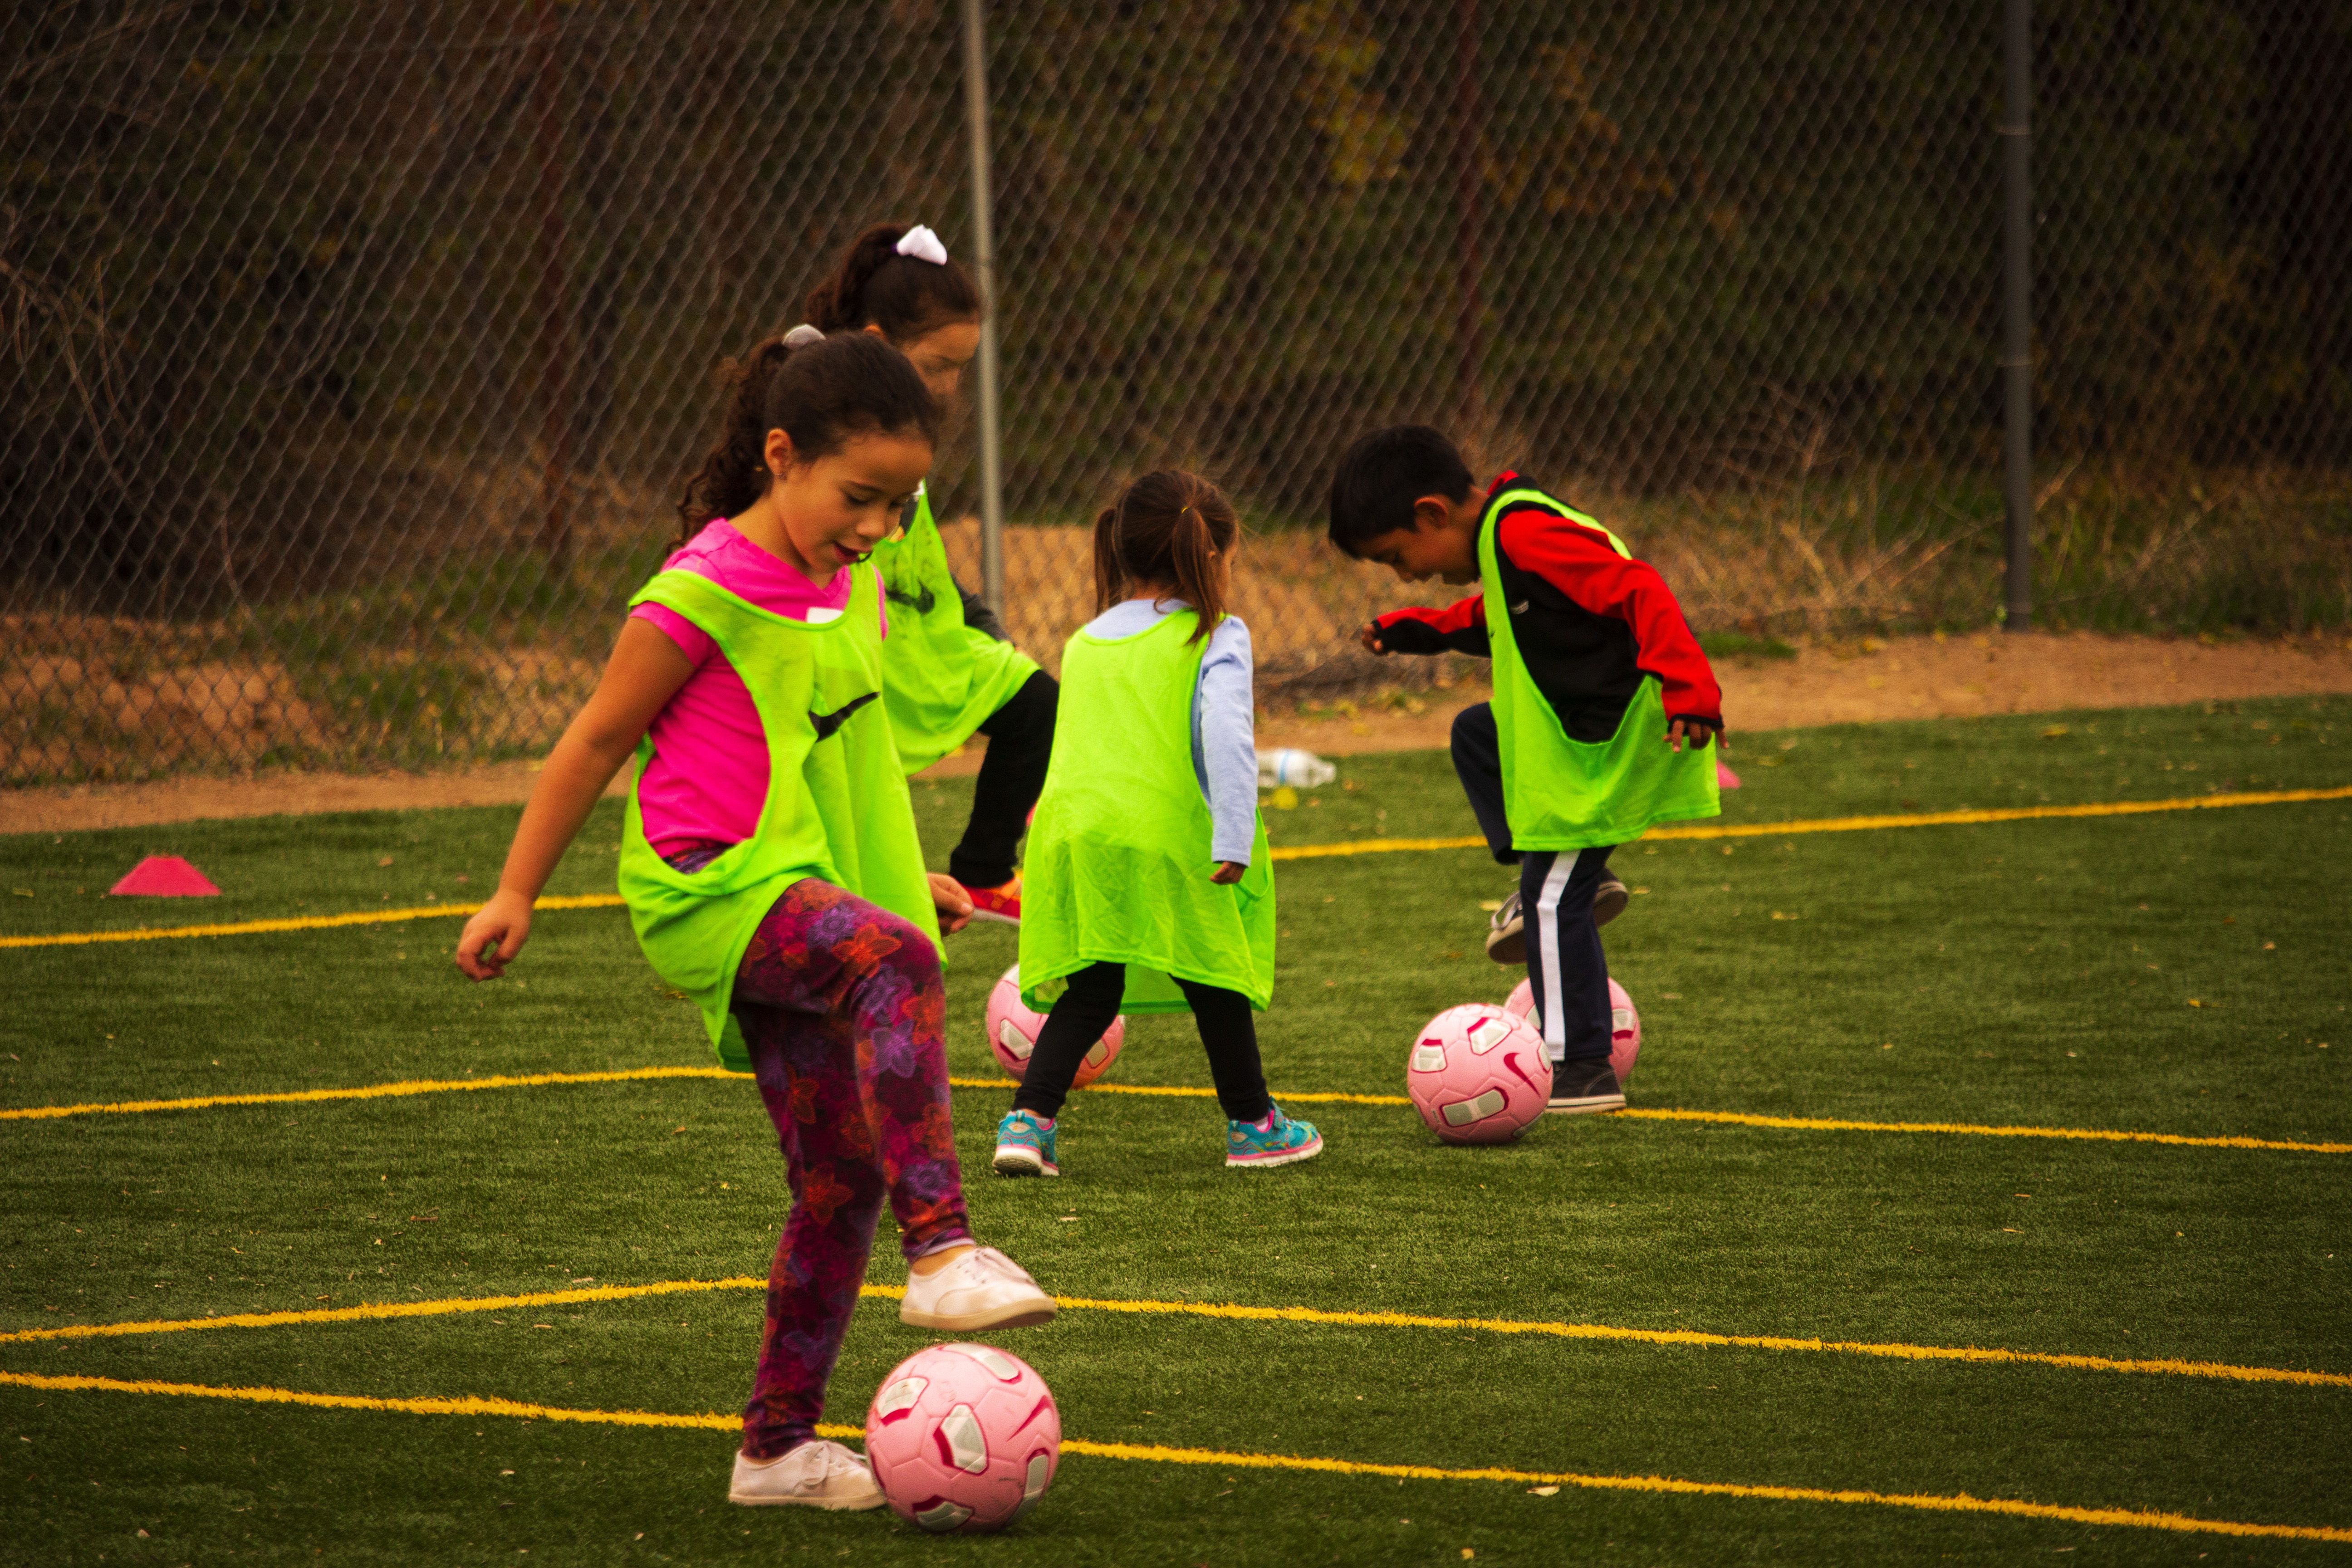 Students train muscle memory and soccer stance through the use of touches—"left, right touches" are one of the most practiced soccer drills as  they improve footwork with the ball. Image by Viridiana Vidales Coyt, United States, 2017.